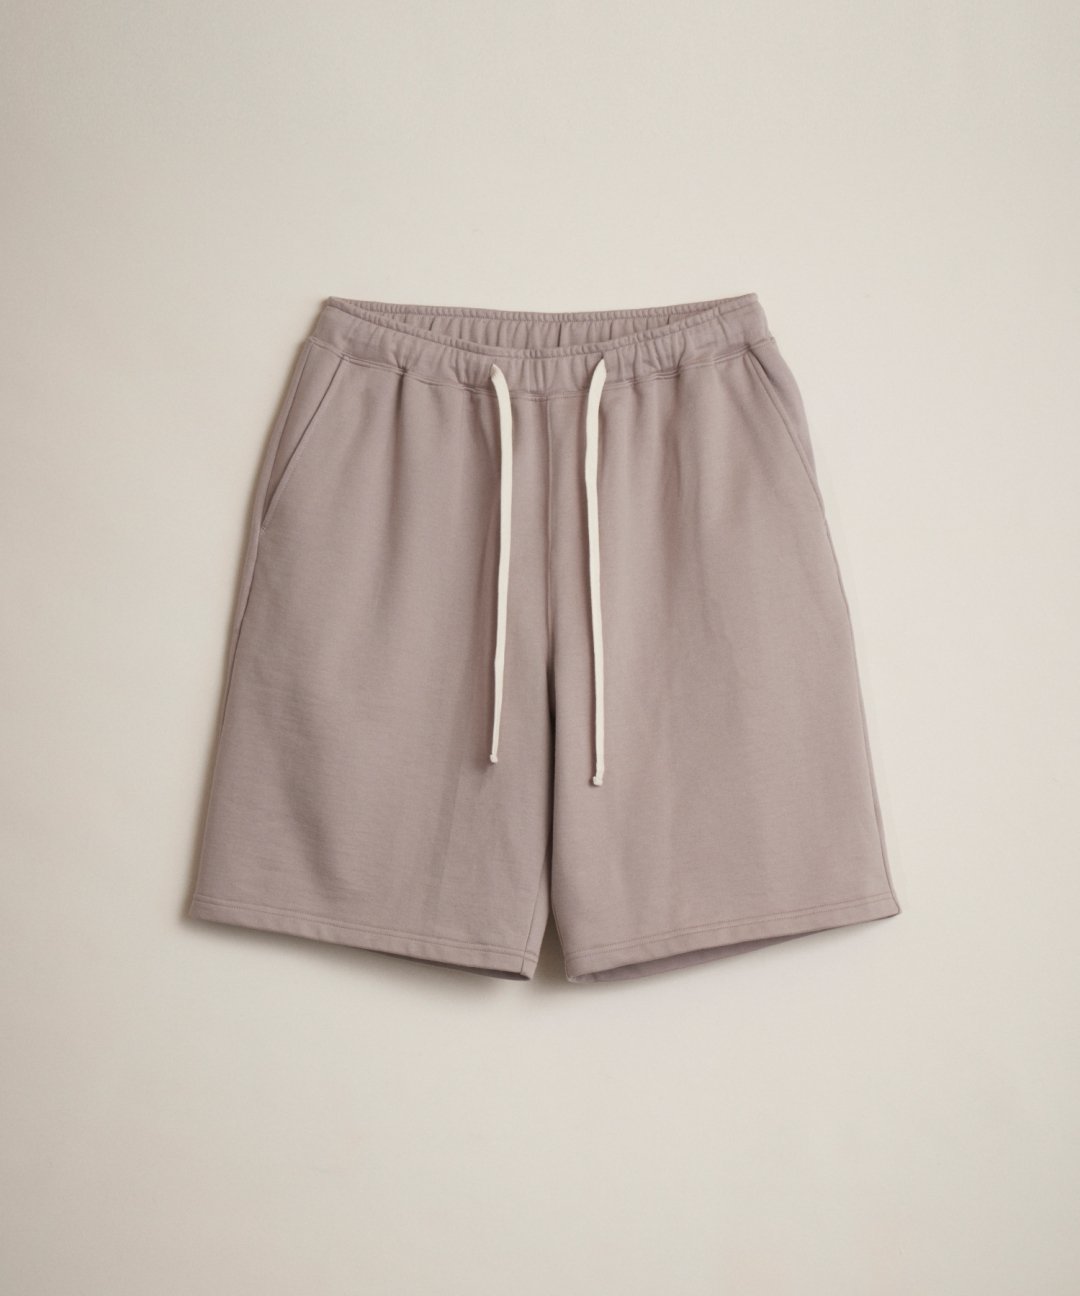 TROVE / RELAX SHORTS / GRAY BEIGE photo